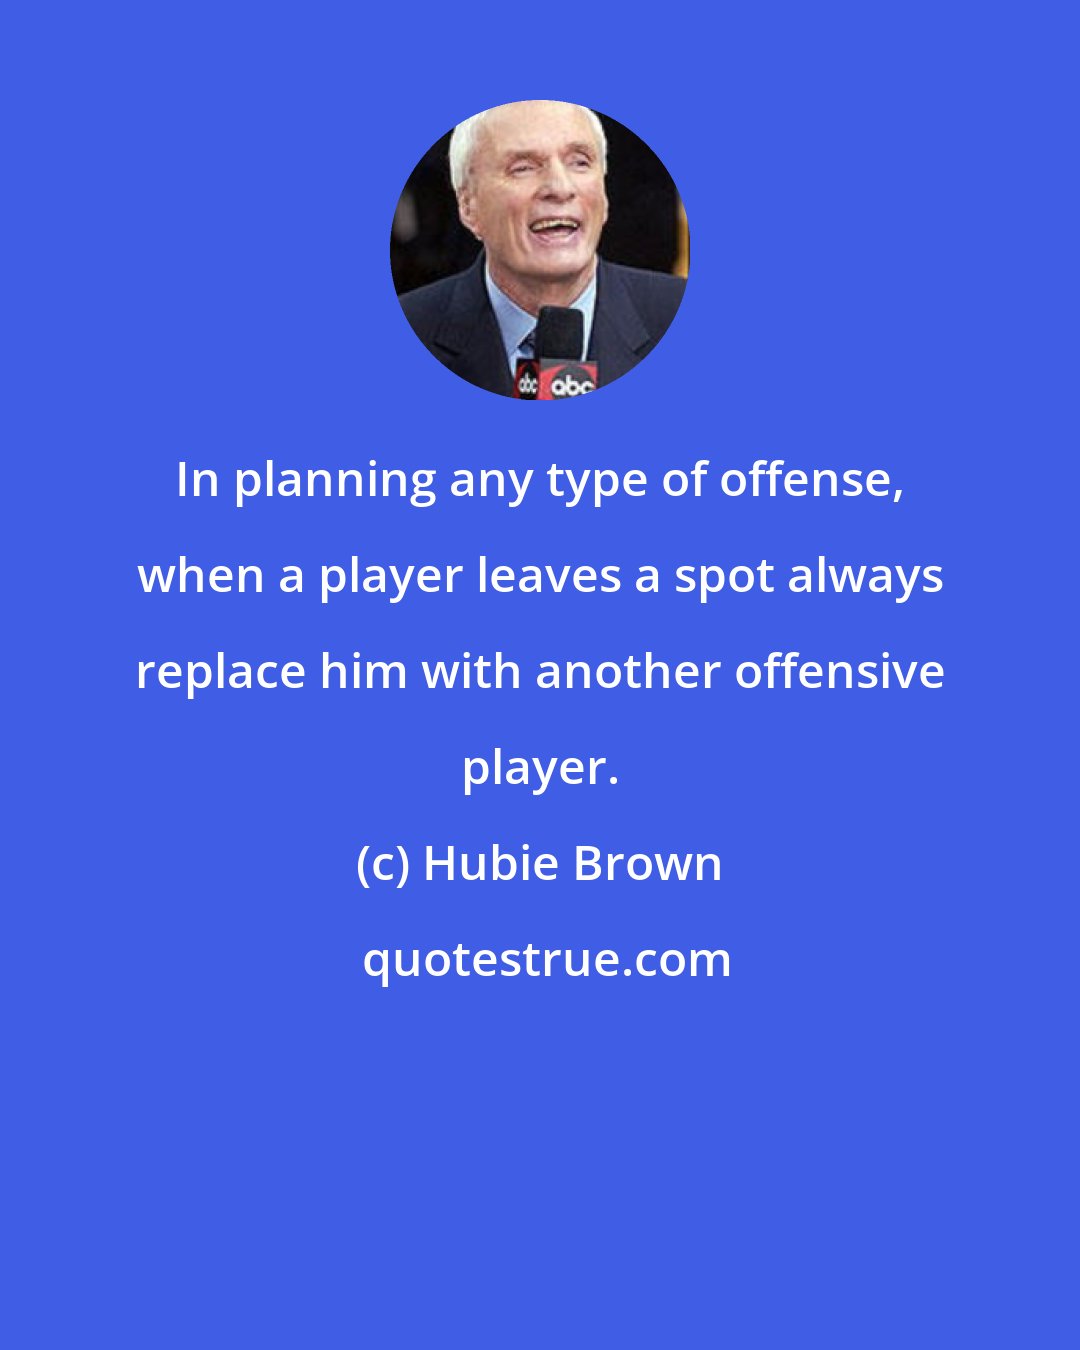 Hubie Brown: In planning any type of offense, when a player leaves a spot always replace him with another offensive player.